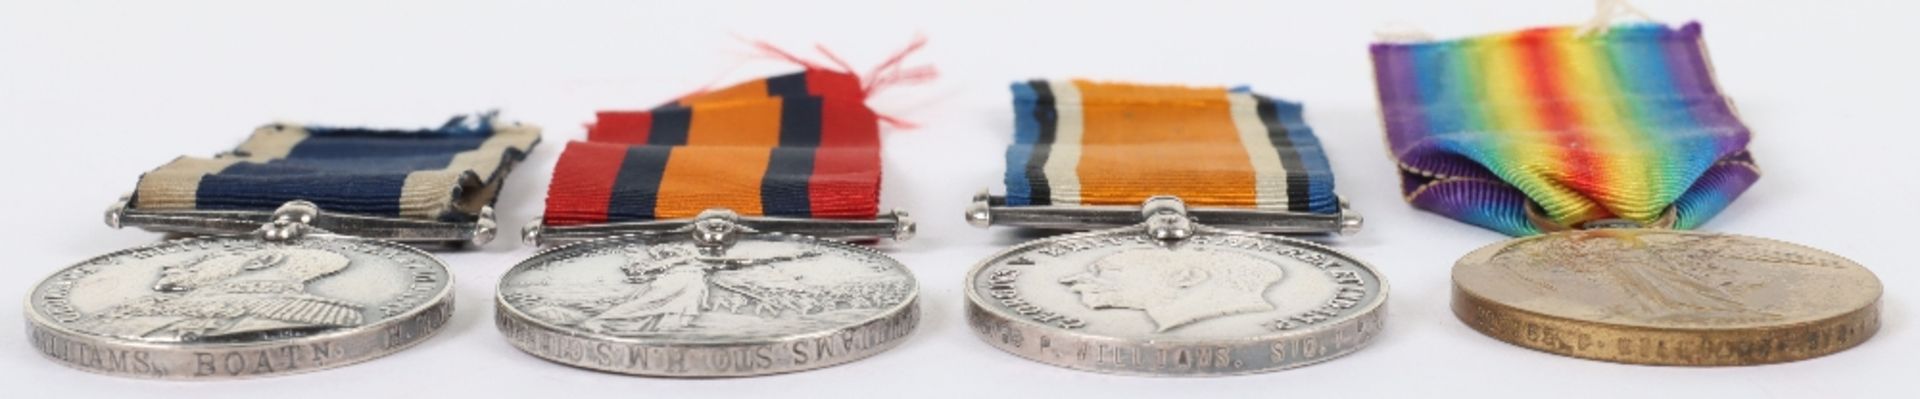 Royal Navy Long Service Medal Group of Four Covering Service from the Boer War to the First World Wa - Image 3 of 3